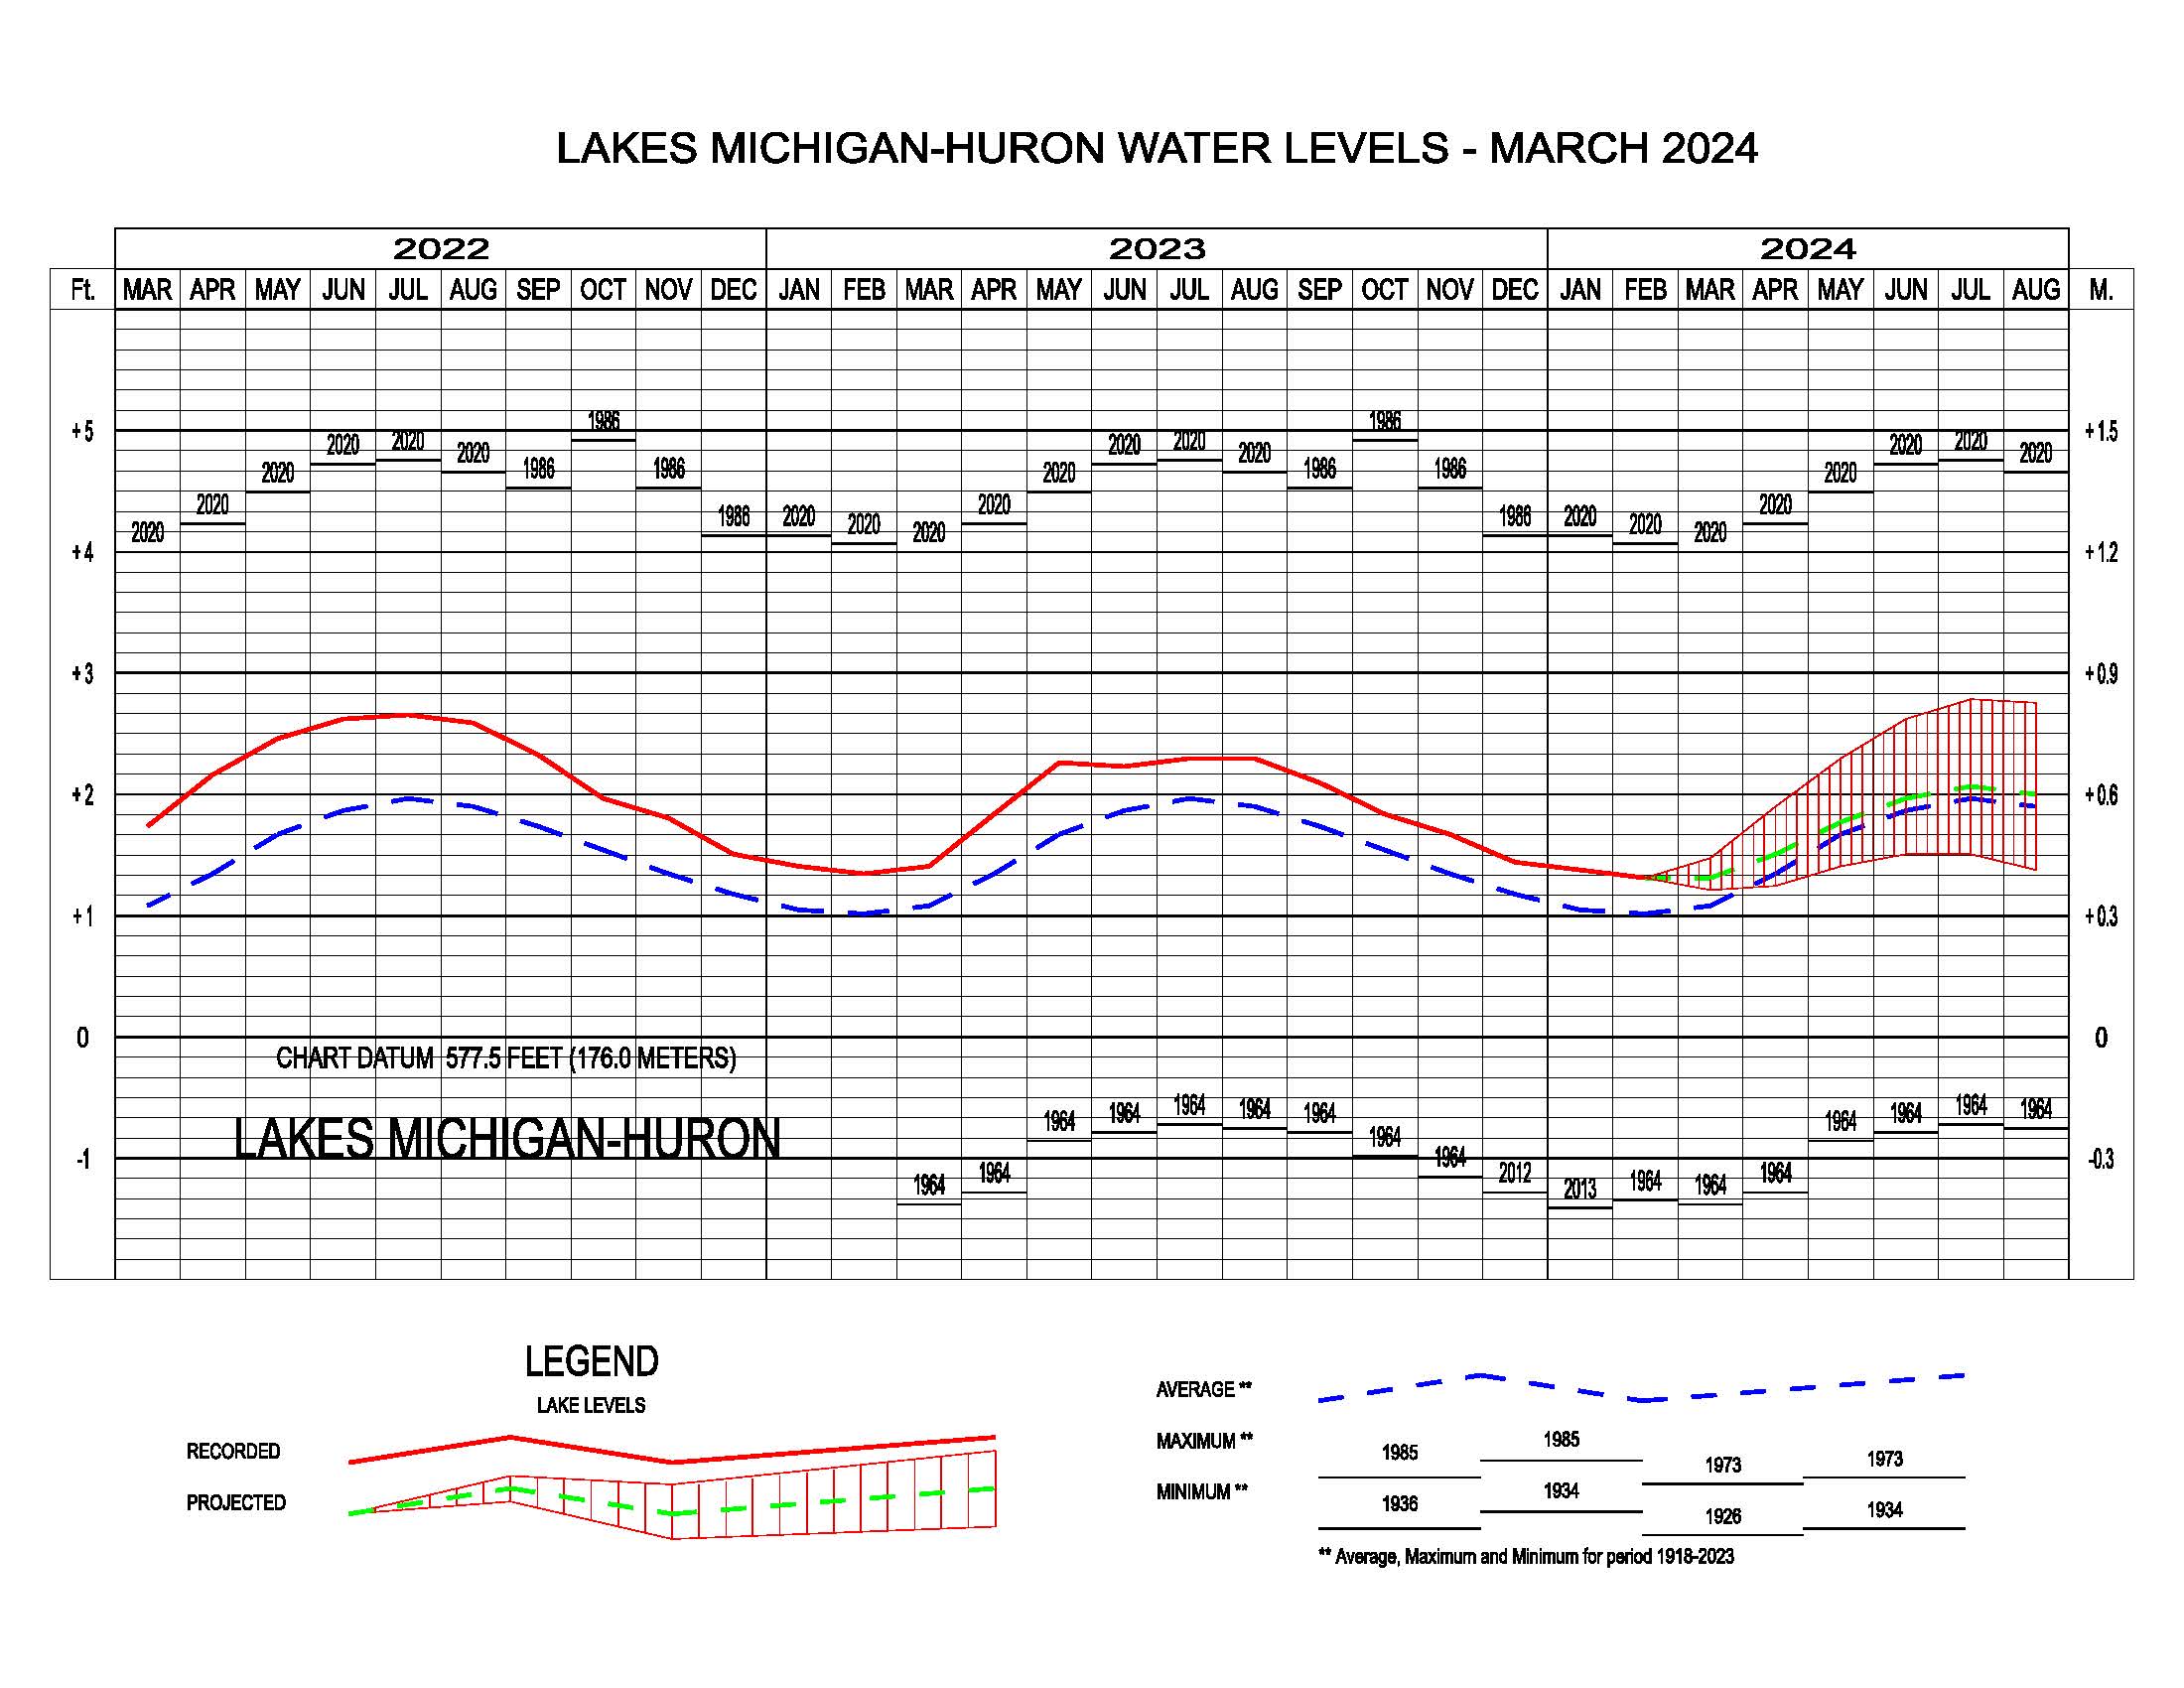 USACE six-month water level forecast for Lake Michigan-Huron retrieved for March 2024 from: https://www.lre.usace.army.mil/Missions/Great-Lakes-Information/Great-Lakes-Water-Levels/Water-Level-Forecast/